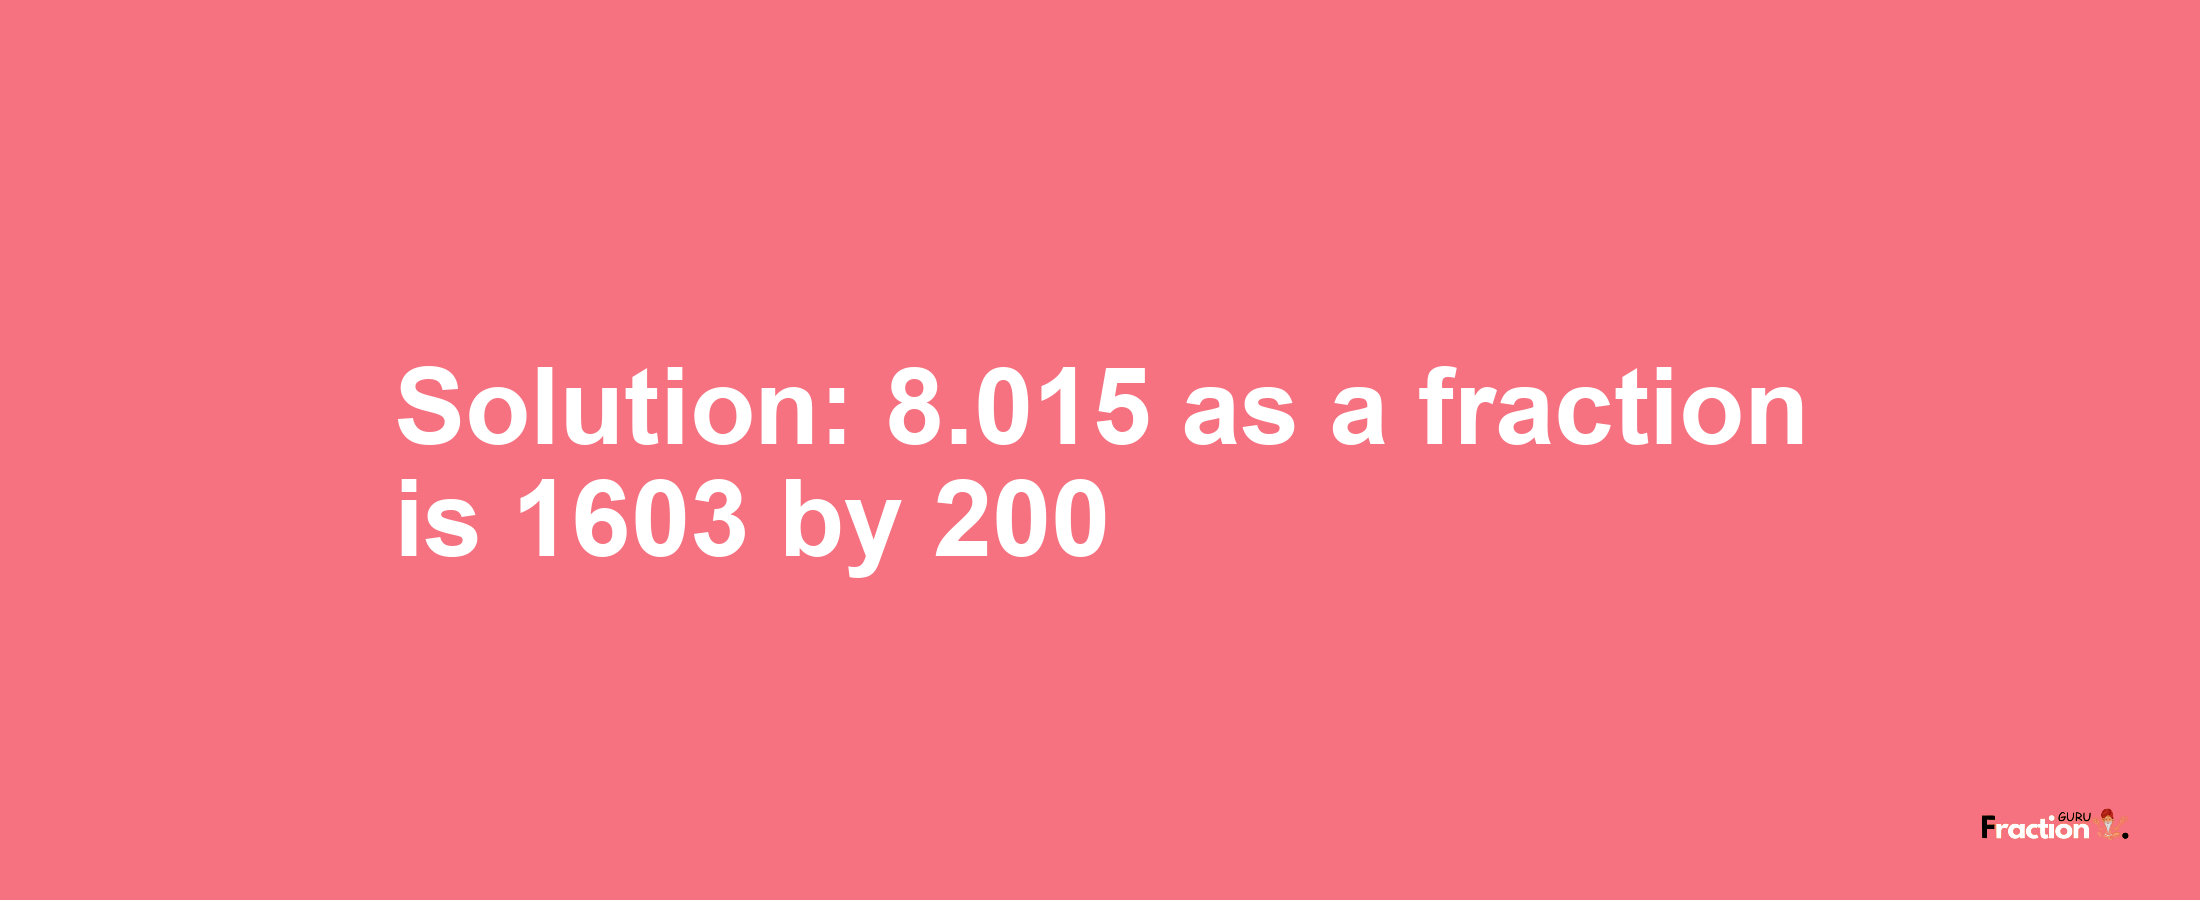 Solution:8.015 as a fraction is 1603/200